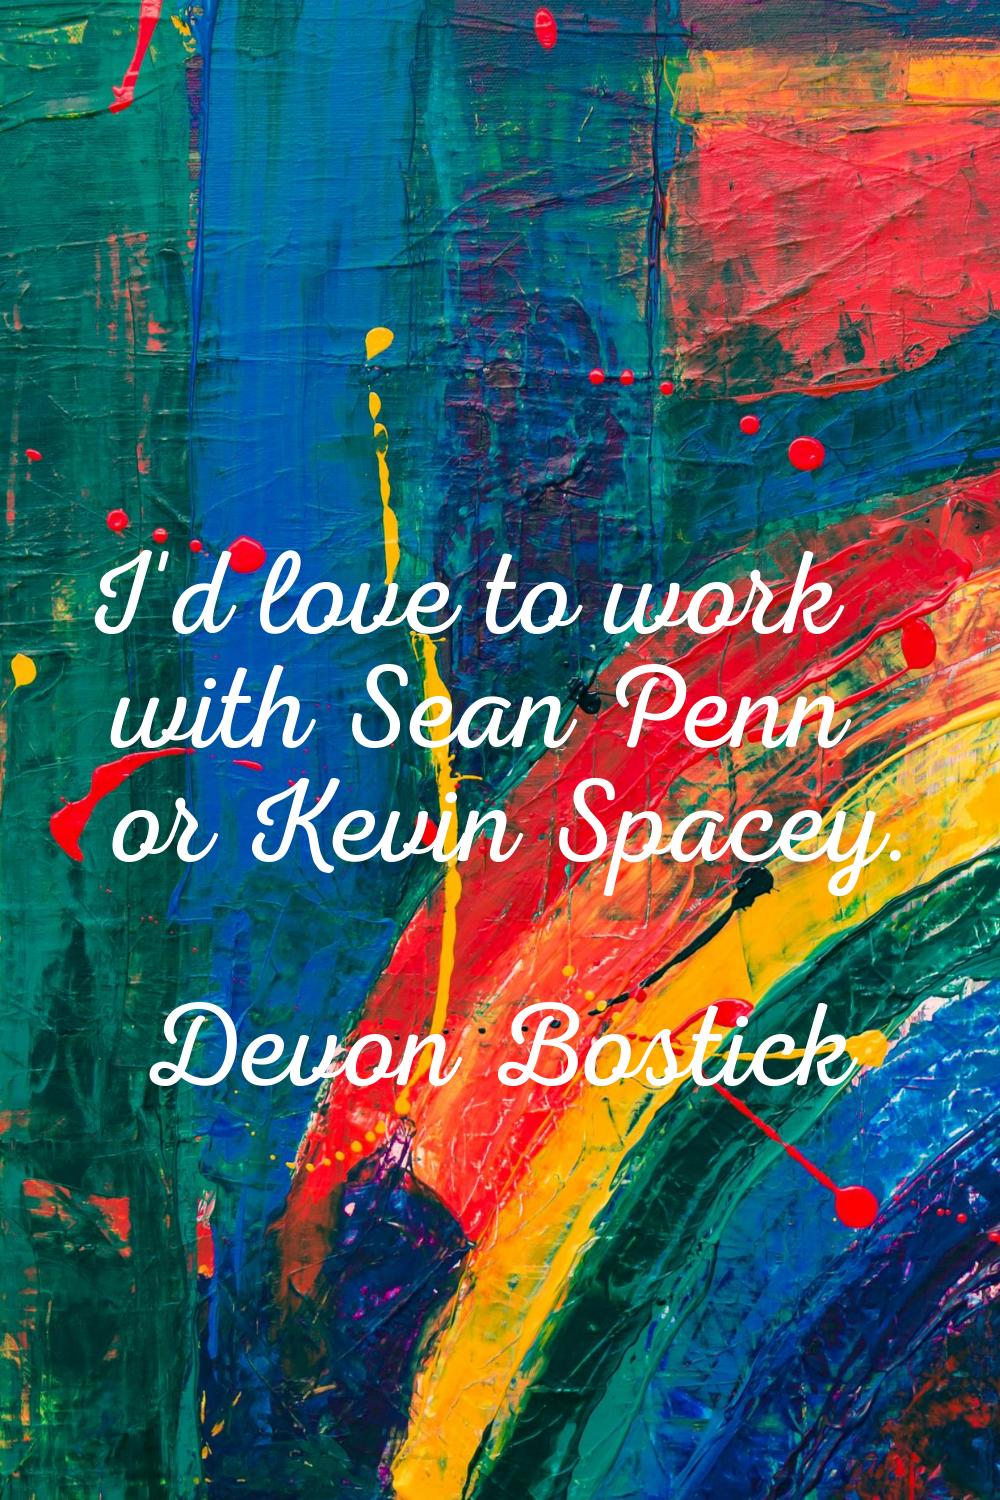 I'd love to work with Sean Penn or Kevin Spacey.